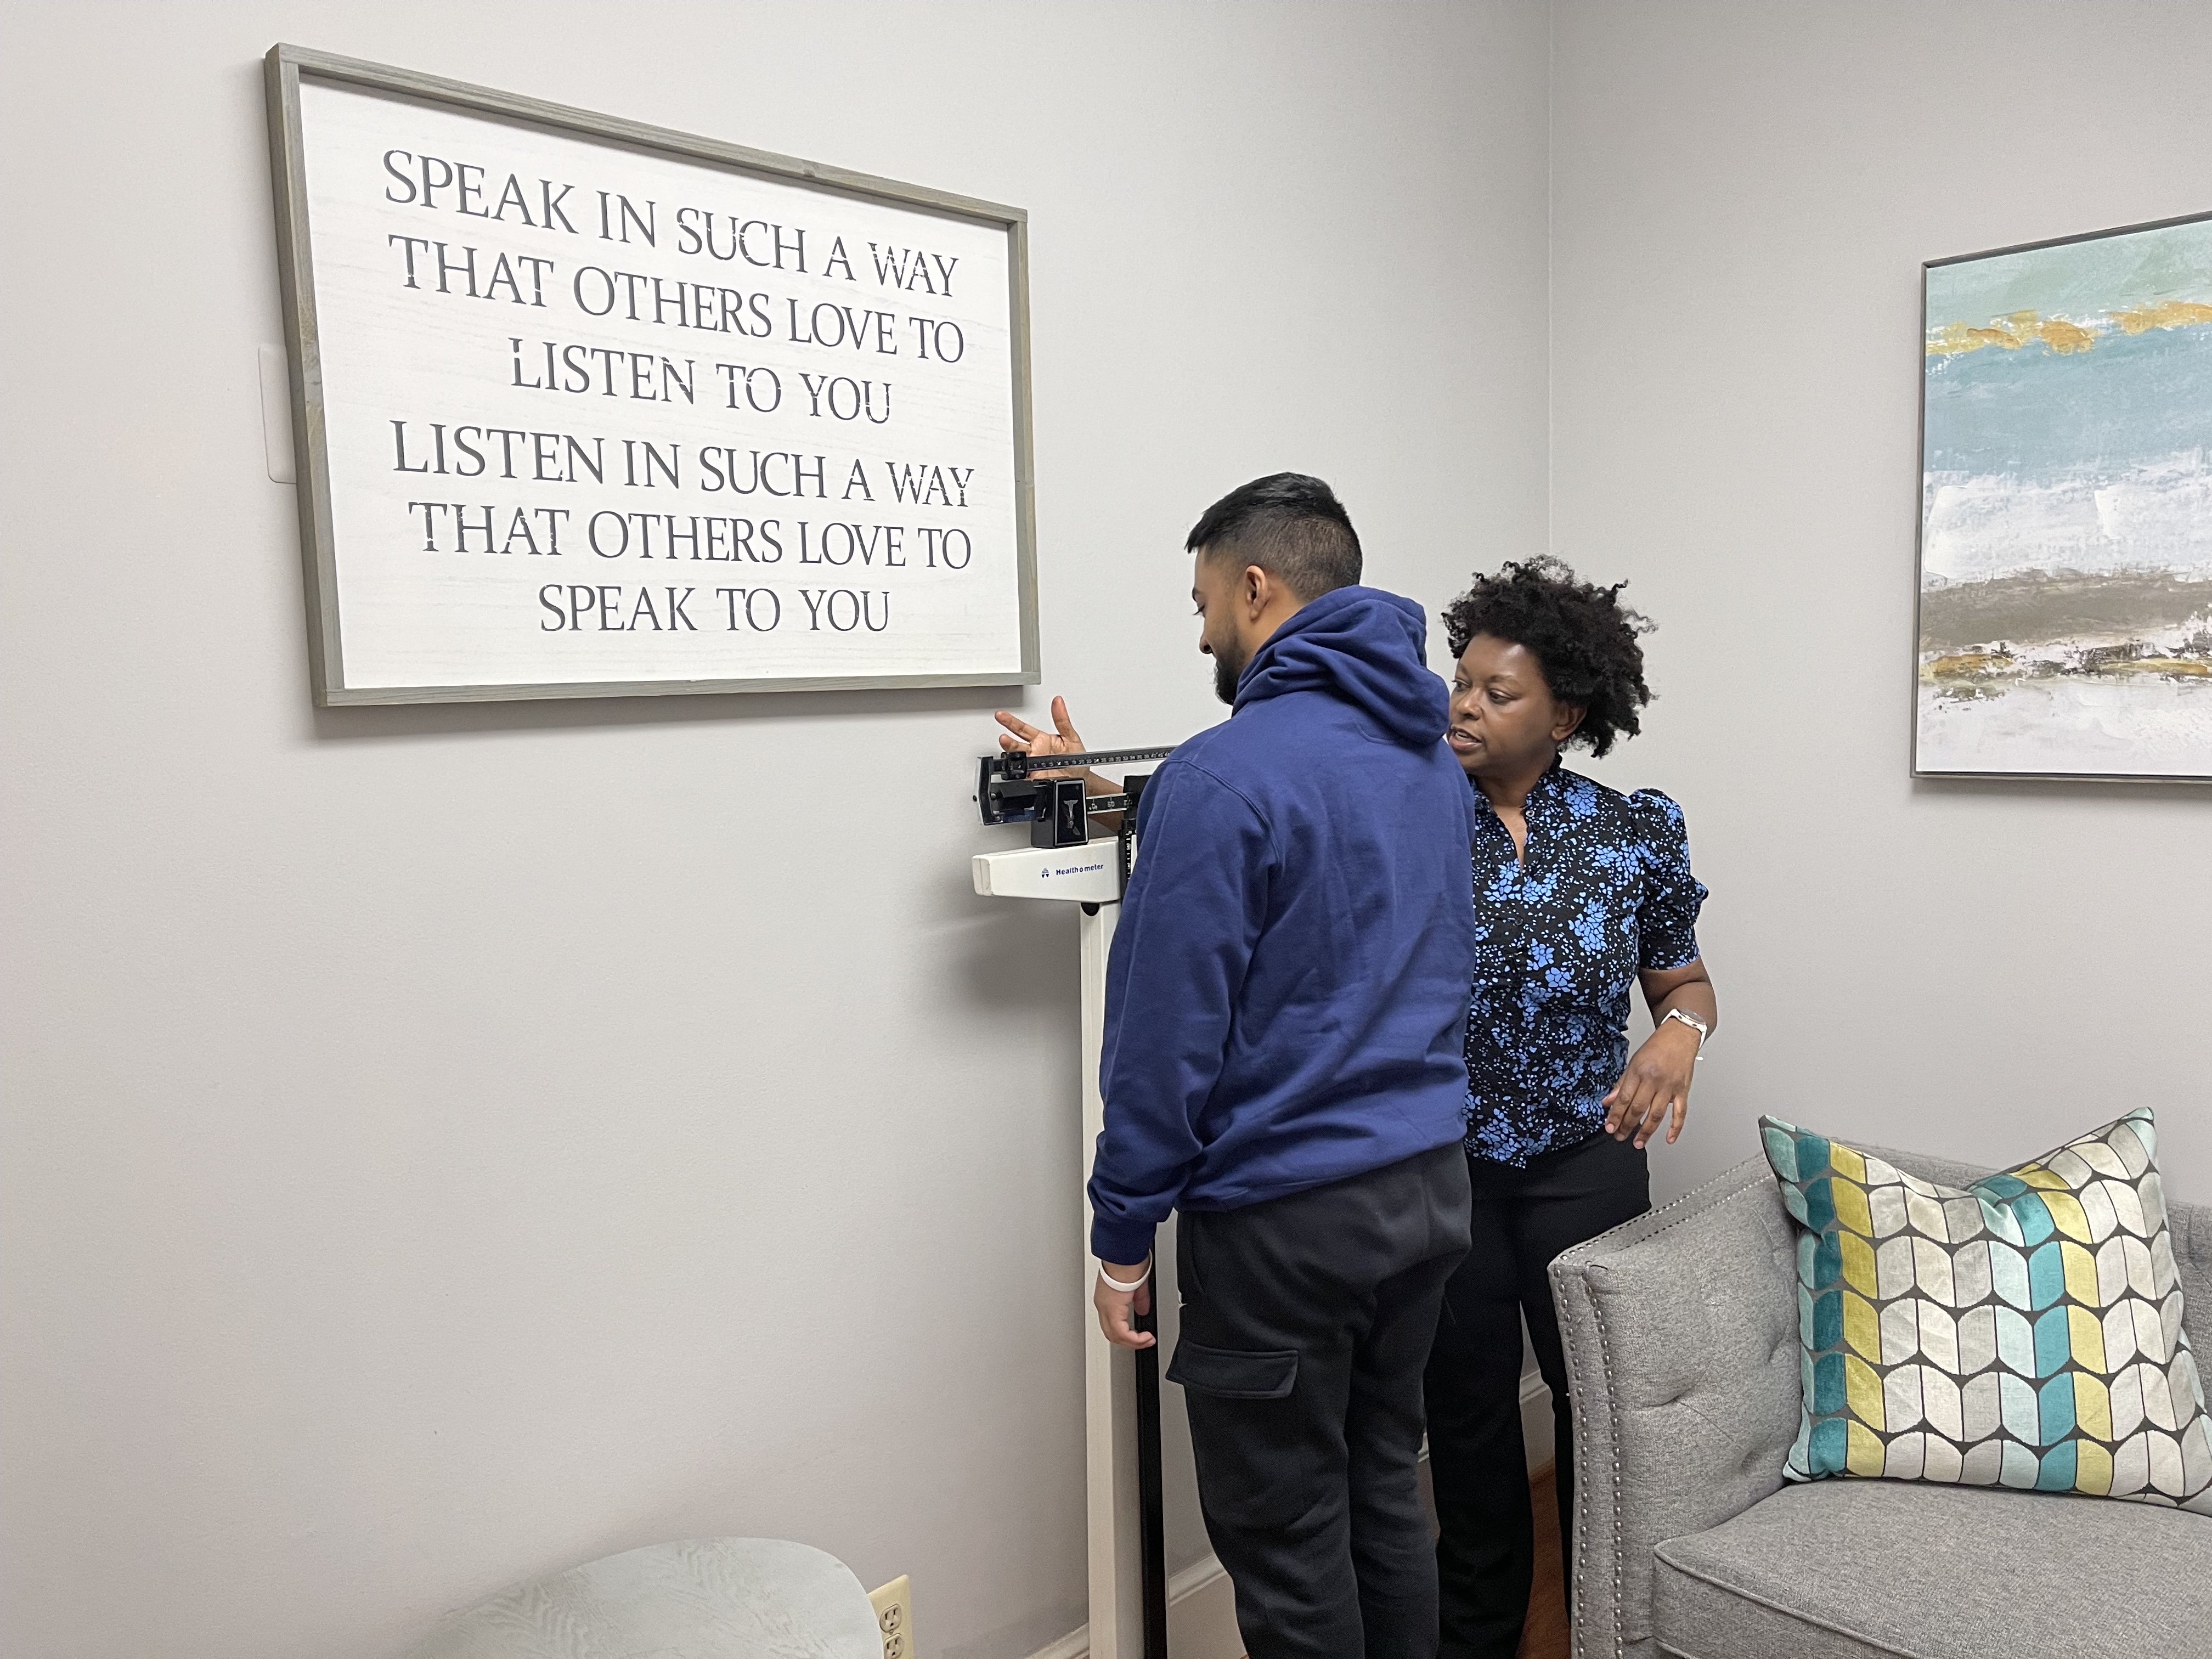 Anelise Antunes, wholistic health coach and nutritionist, serves as the resident health coach for the resource center arm of the Capitol Hill Counseling and Resource Center; here, she's weighing a male client.